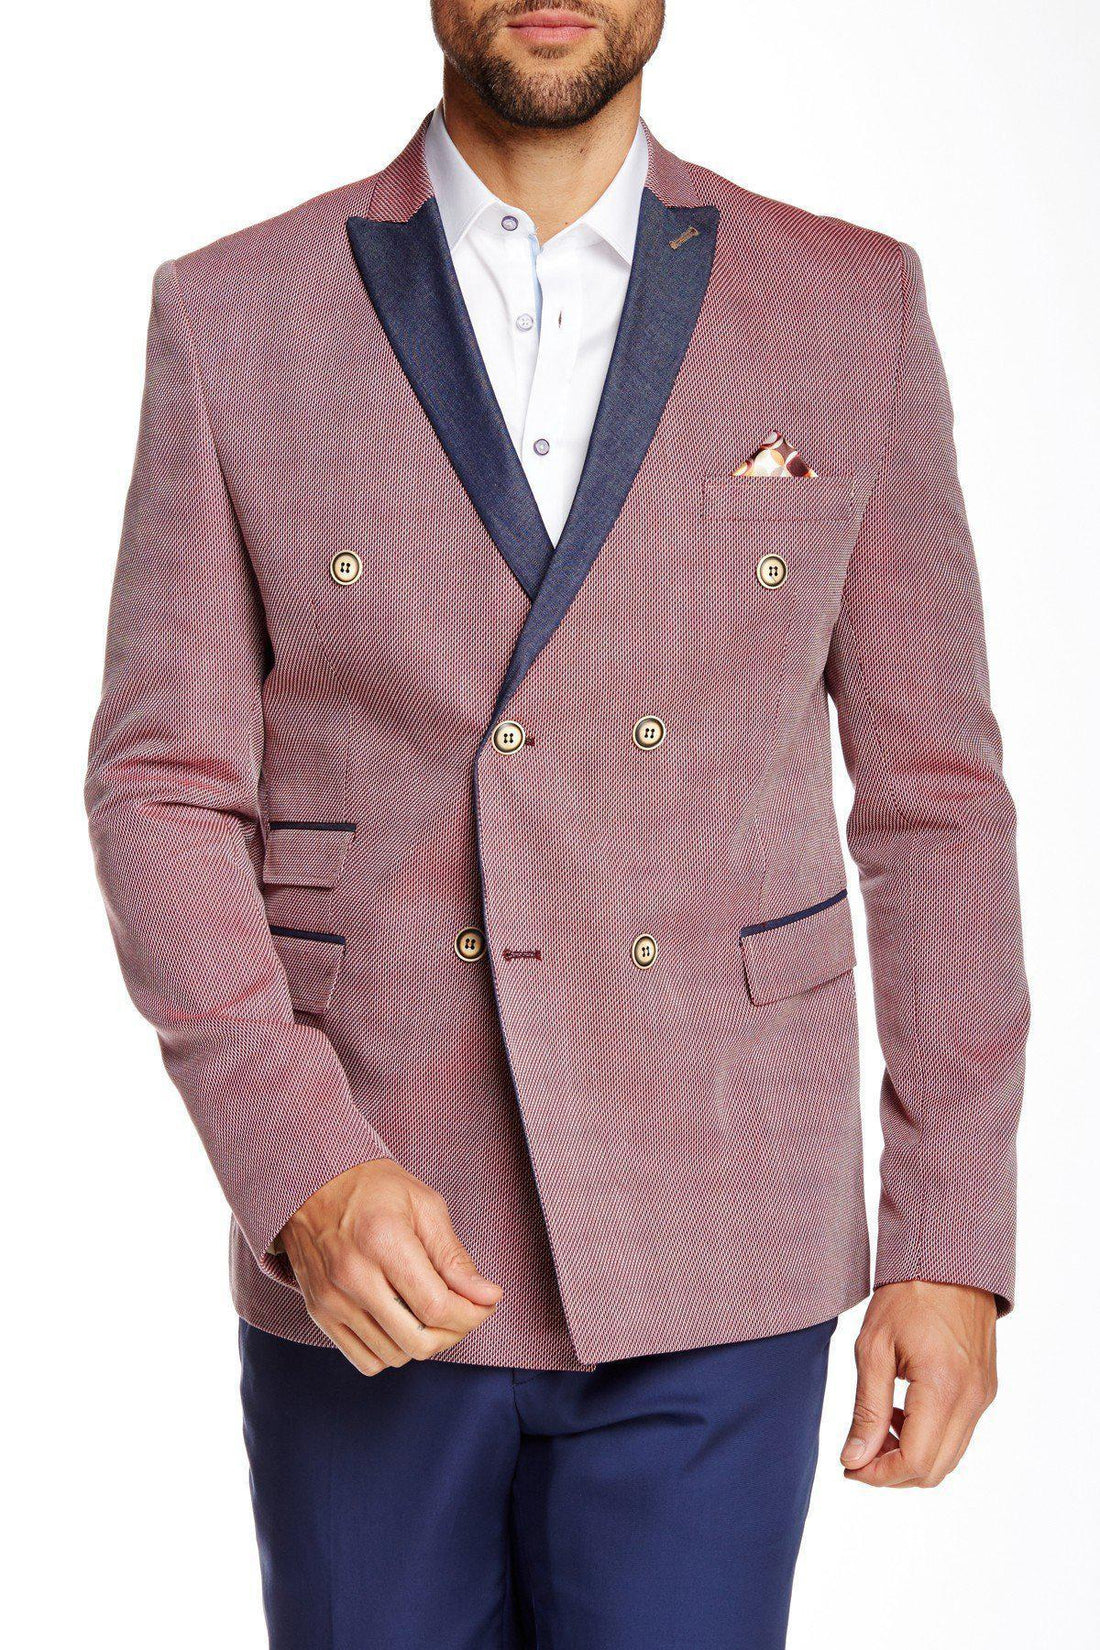 CONTRAST LAPEL DOUBLE BREASTED BLAZER - RED - Ron Tomson